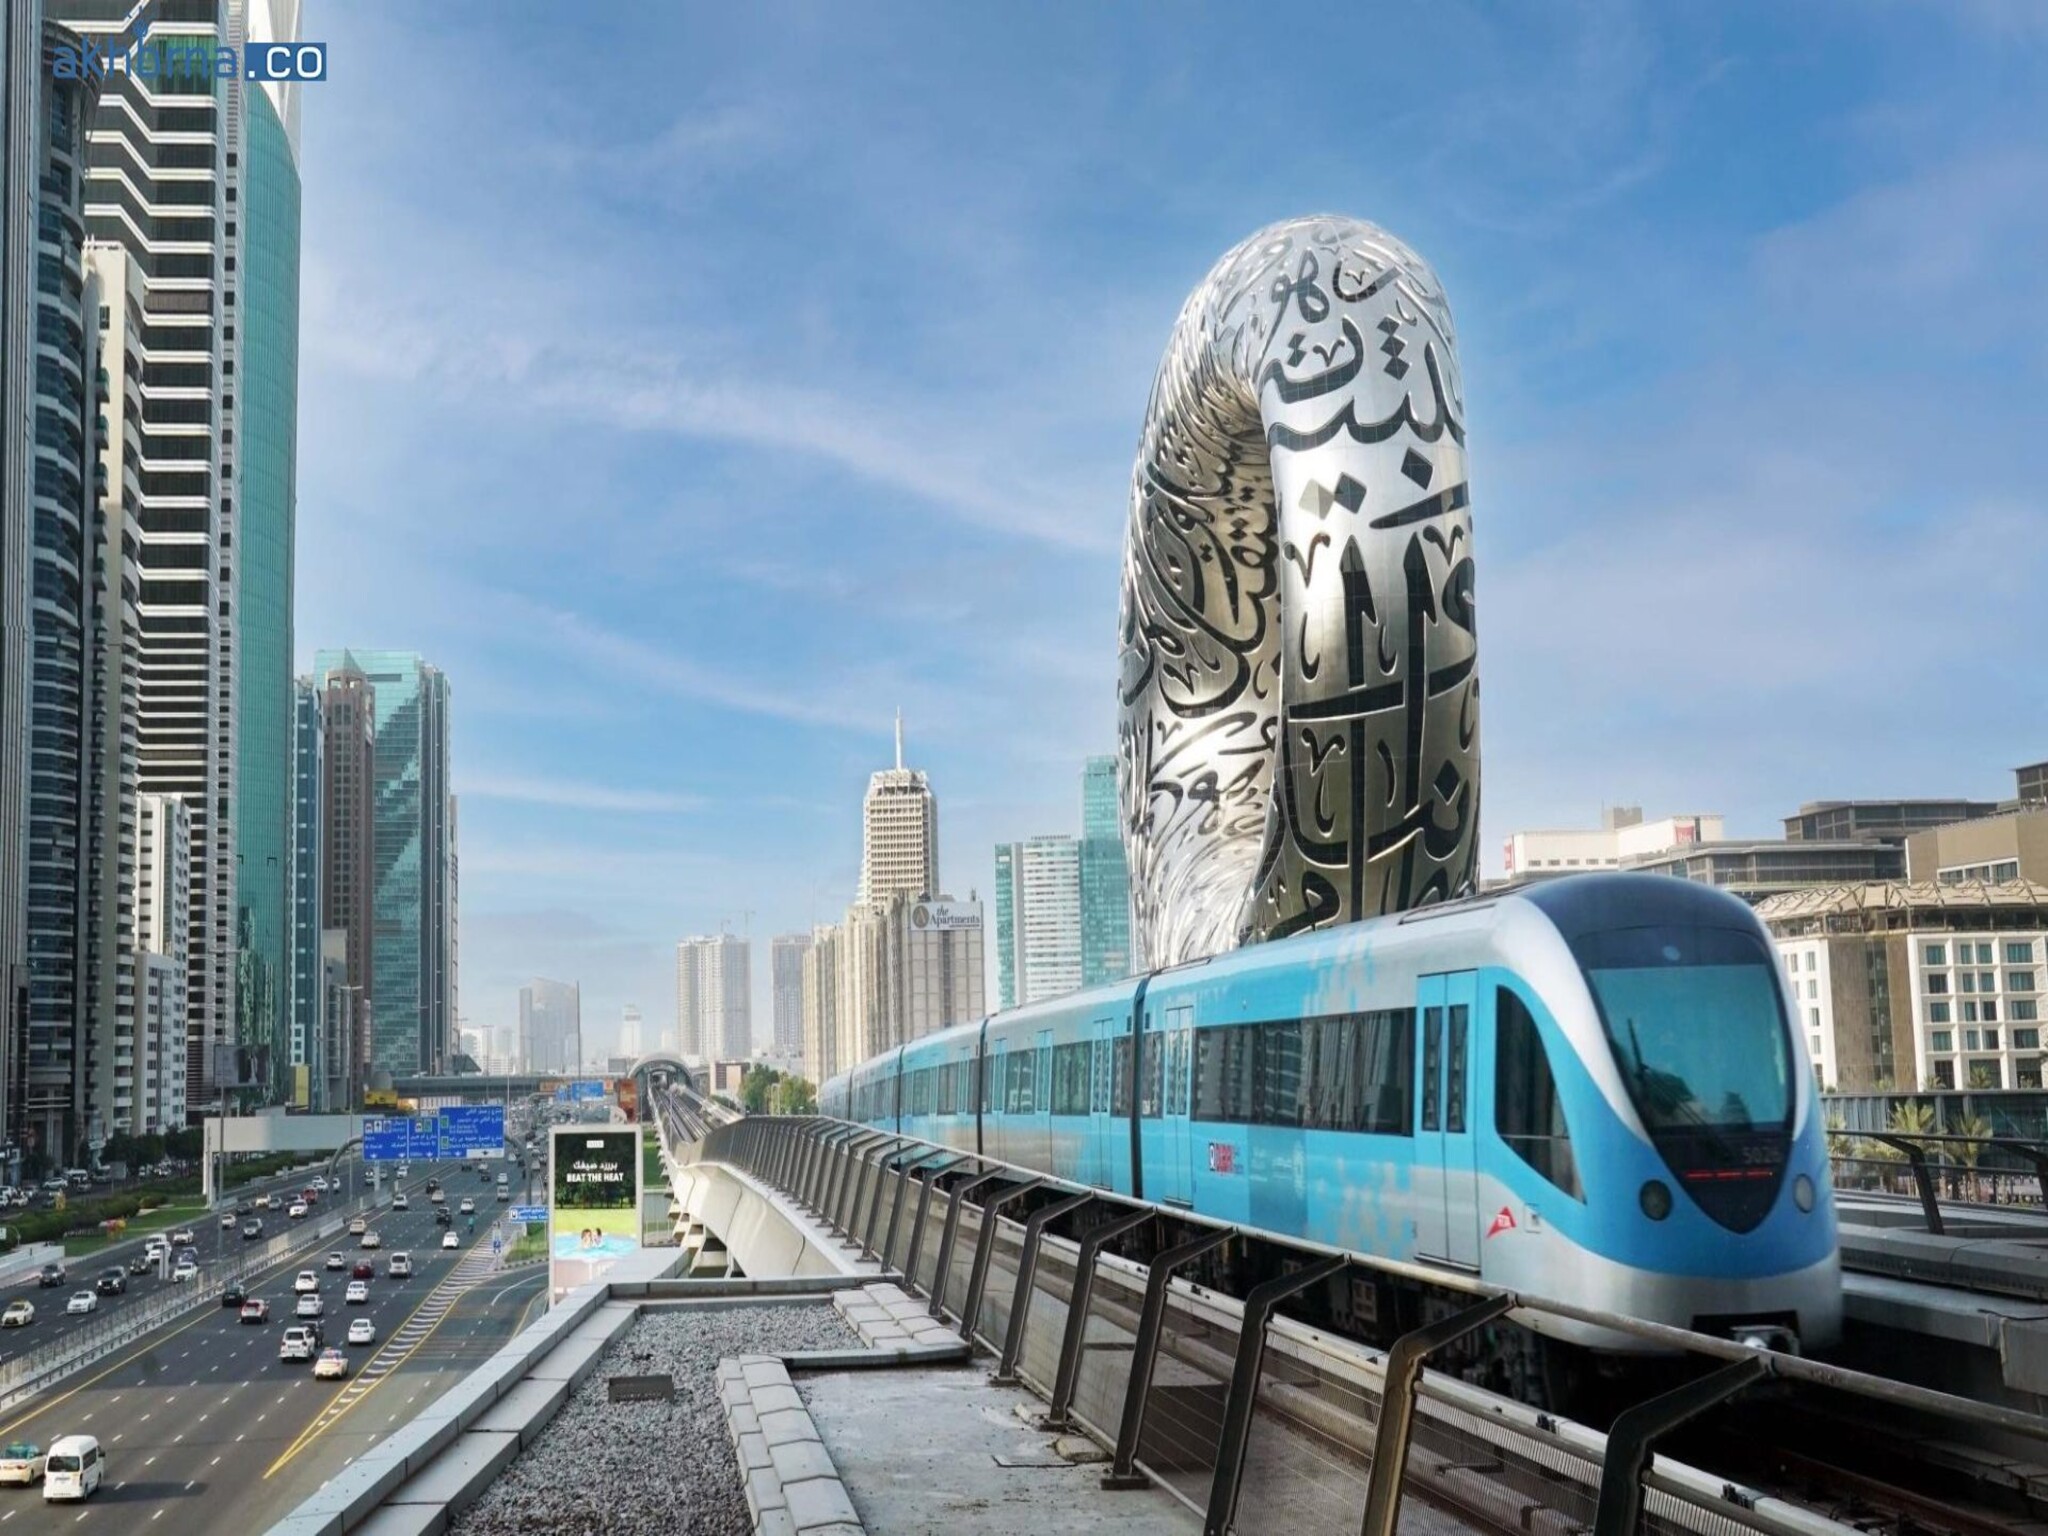 Dubai announces plan to add 32 new metro stations by 2030